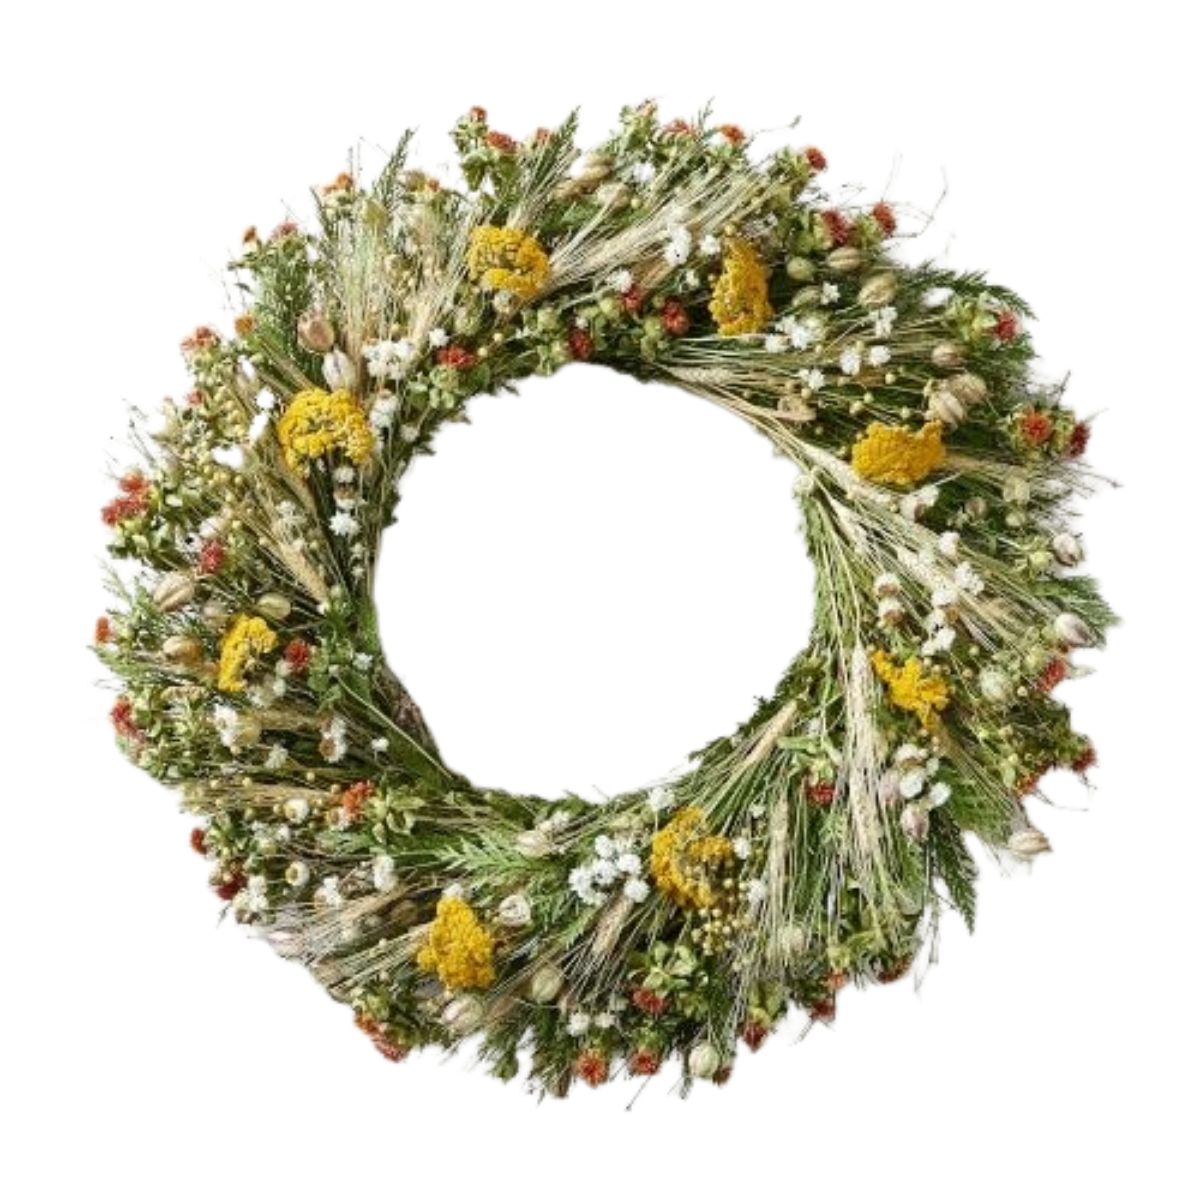 dried floral wreath with orange safflowers, yellow yarrow and ivory ammobium and green foliage from williams sonoma